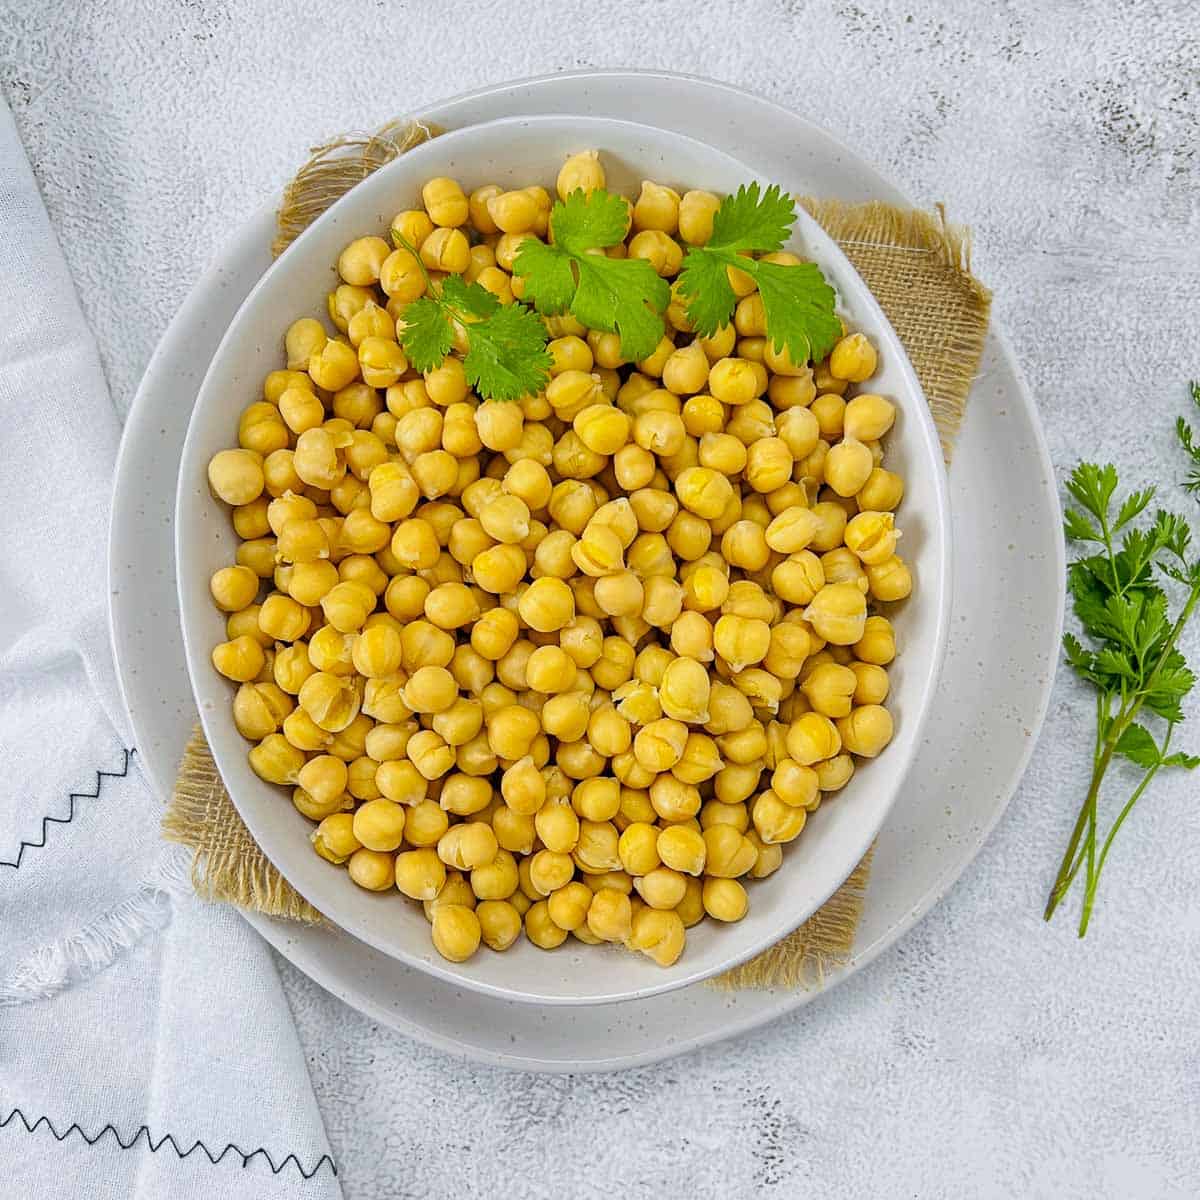 Cooked chickpeas in a white bowl with cilantro in the background.